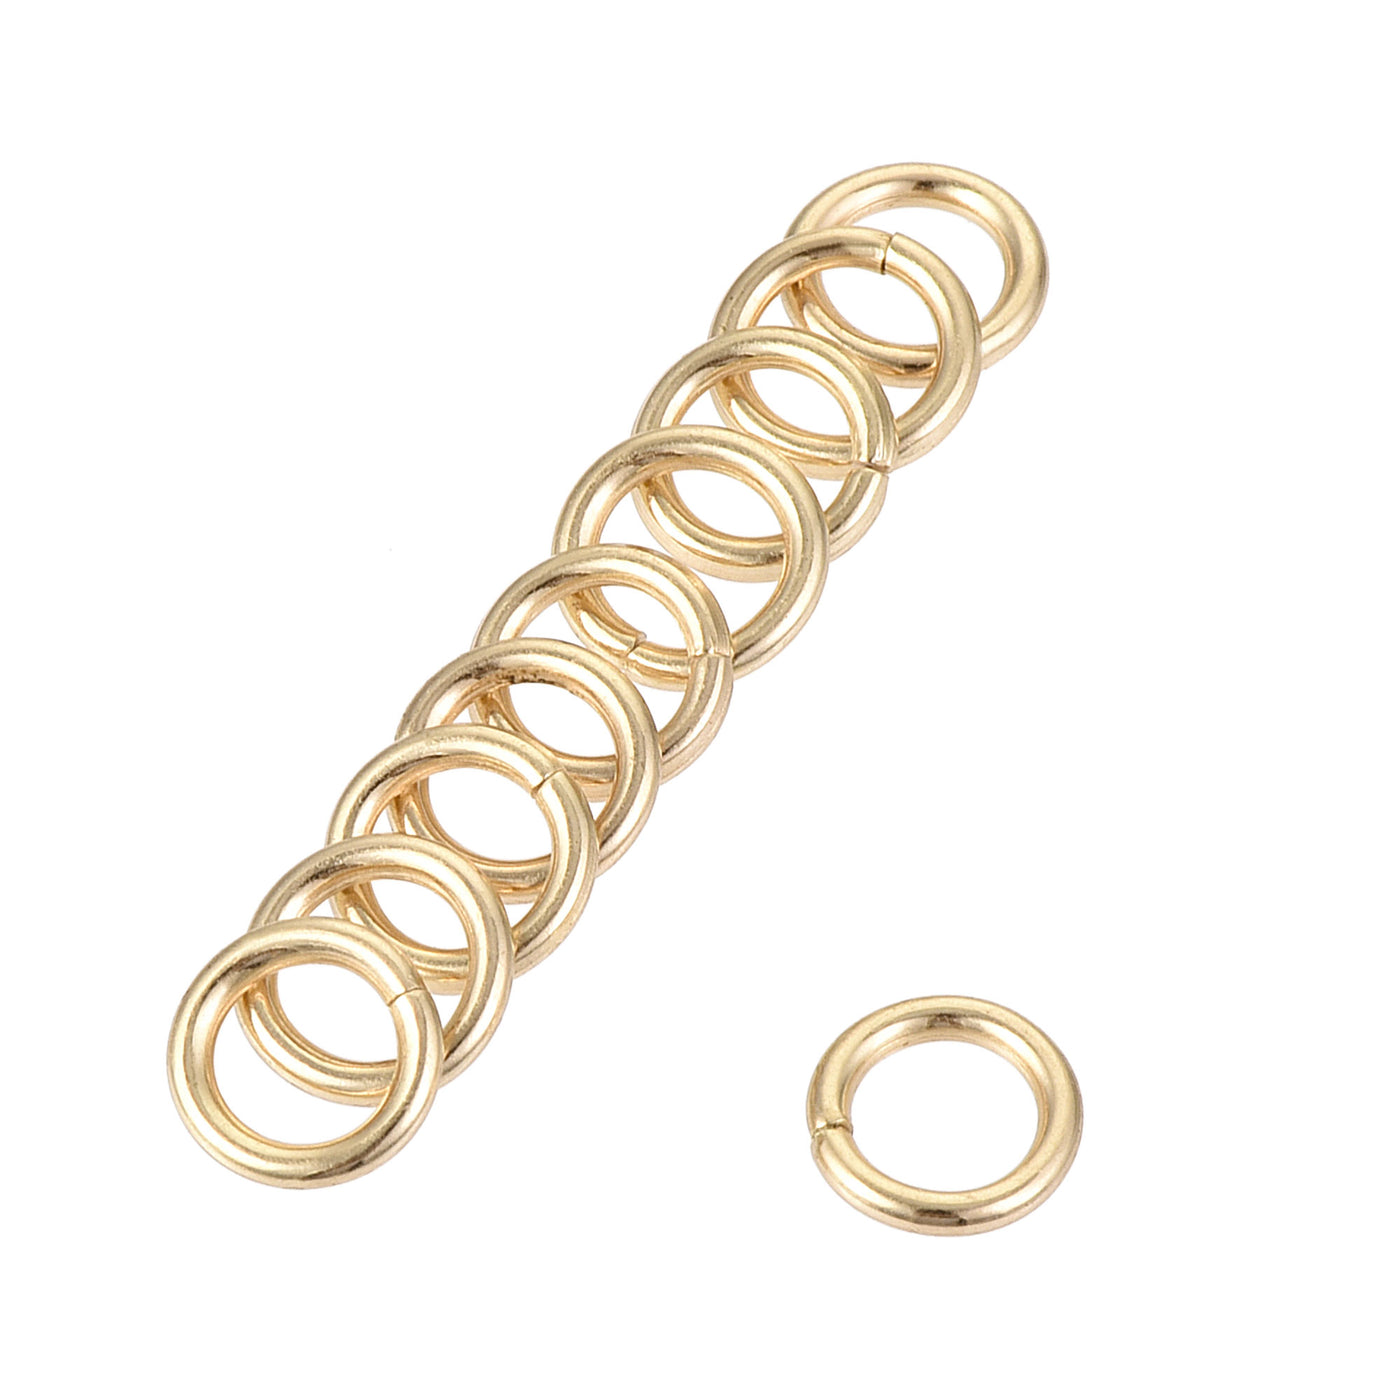 uxcell Uxcell 5mm Metal O Rings Non-Welded for Straps Bags Belts DIY Gold Tone 30pcs